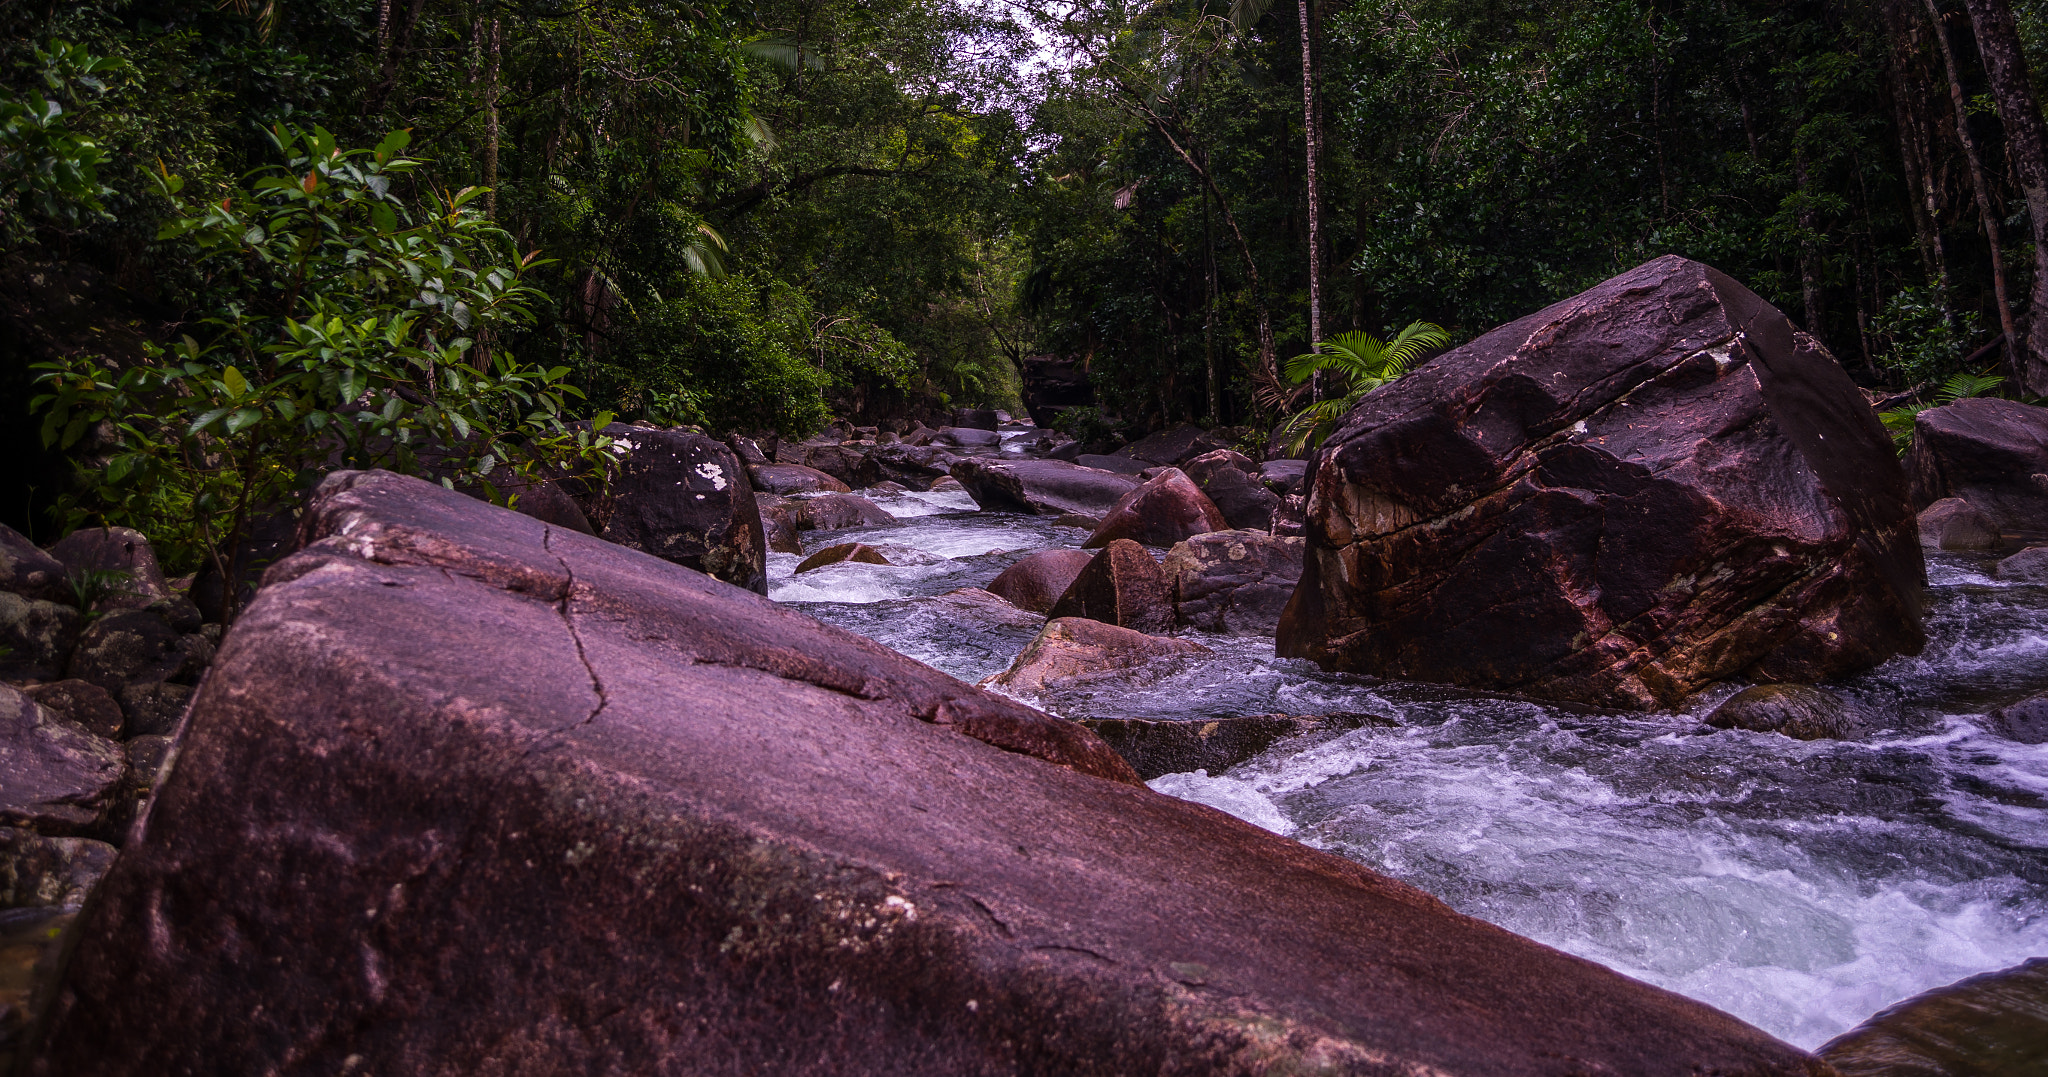 AF Zoom-Nikkor 28-70mm f/3.5-4.5 sample photo. Finch hatton gorge near makay in queensland photography